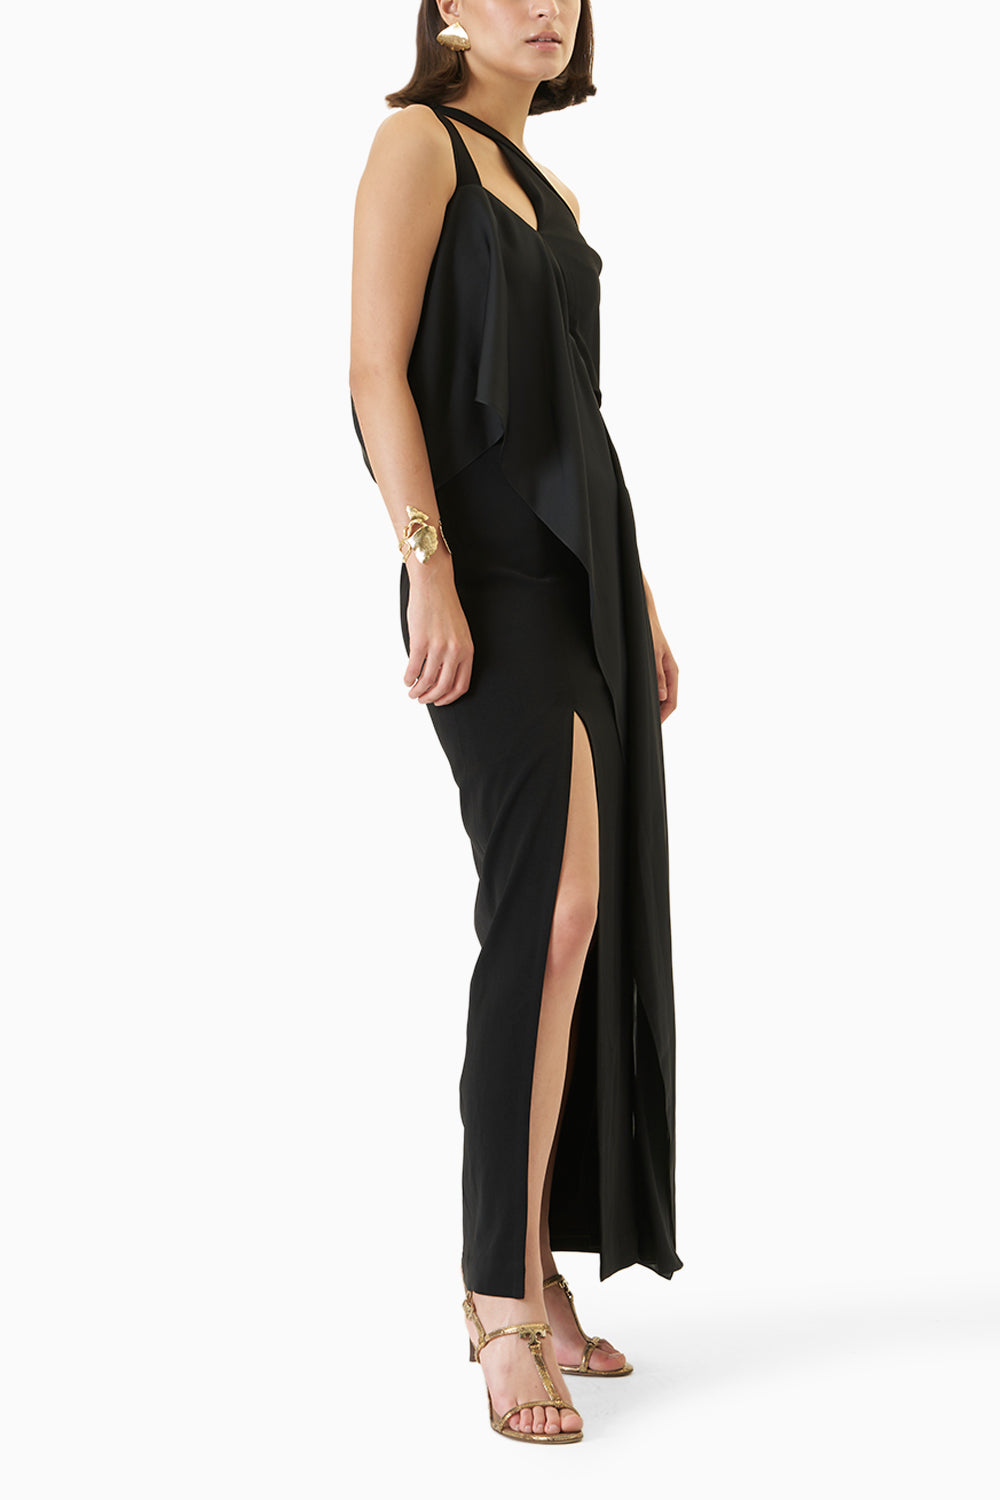 Noir One Cold Shoulder Fitted Gown